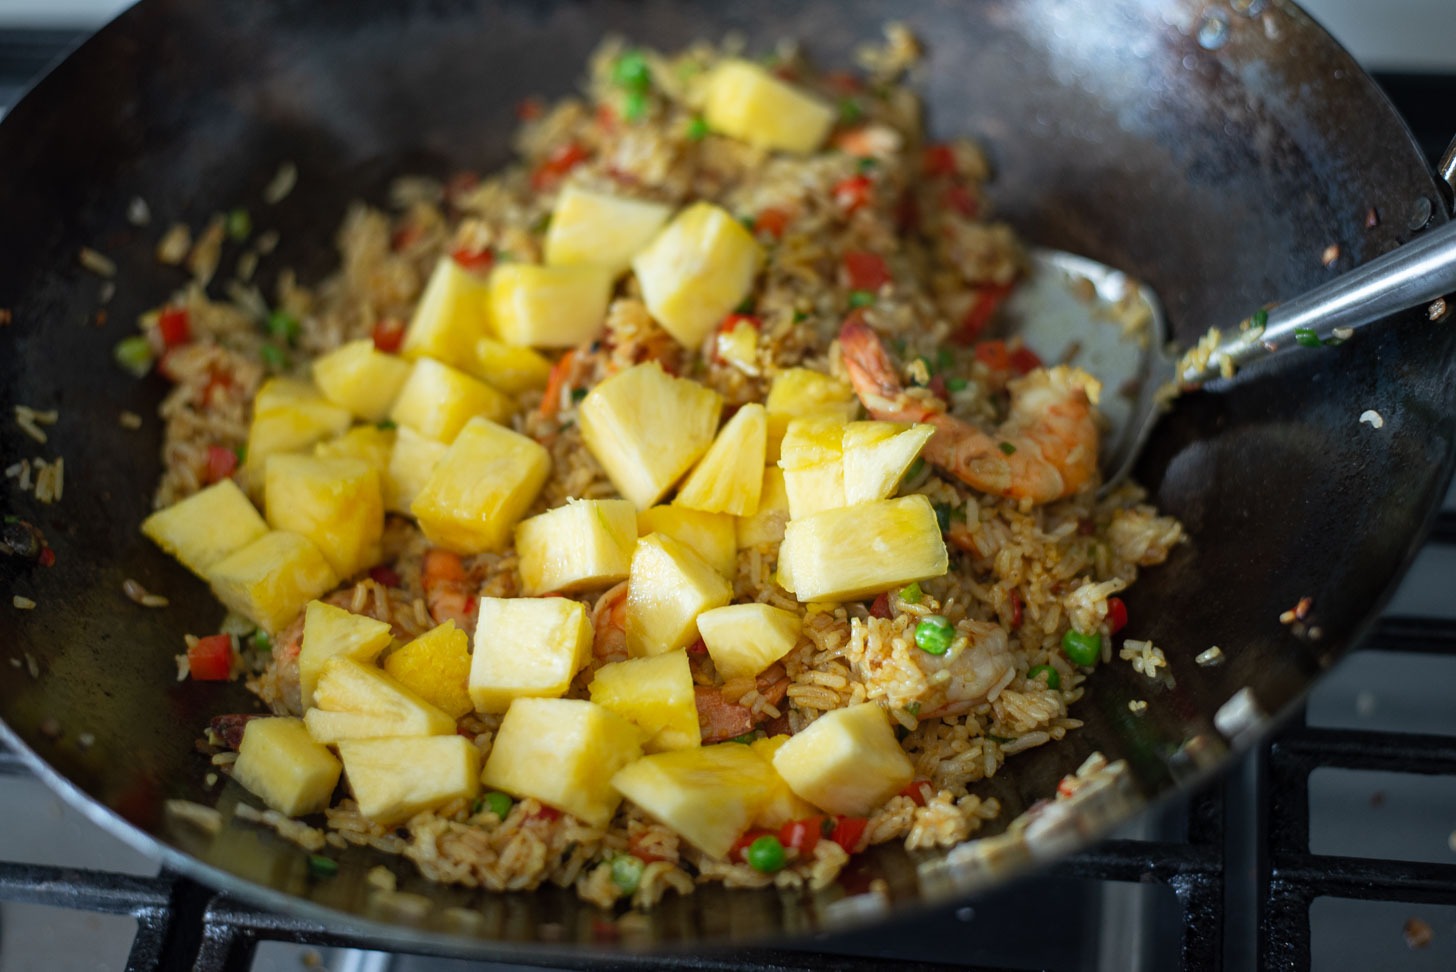 Fresh pineapple chunks added to the Thai fried rice mixture.